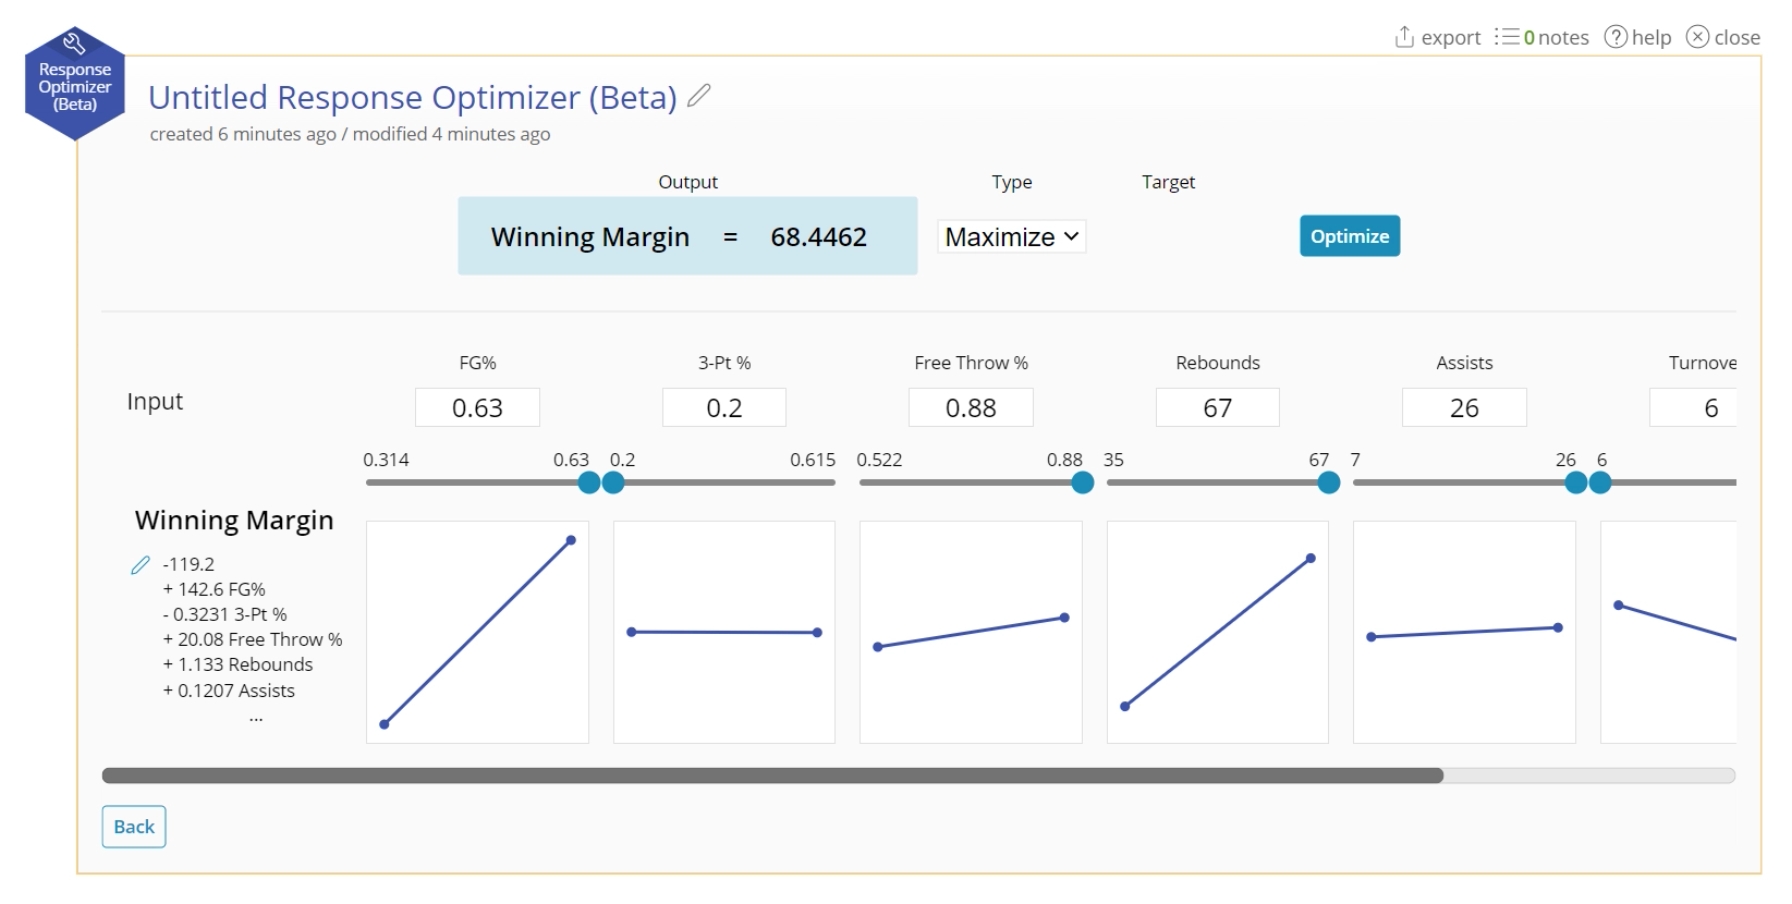 Optimizer with "maximize" selected.